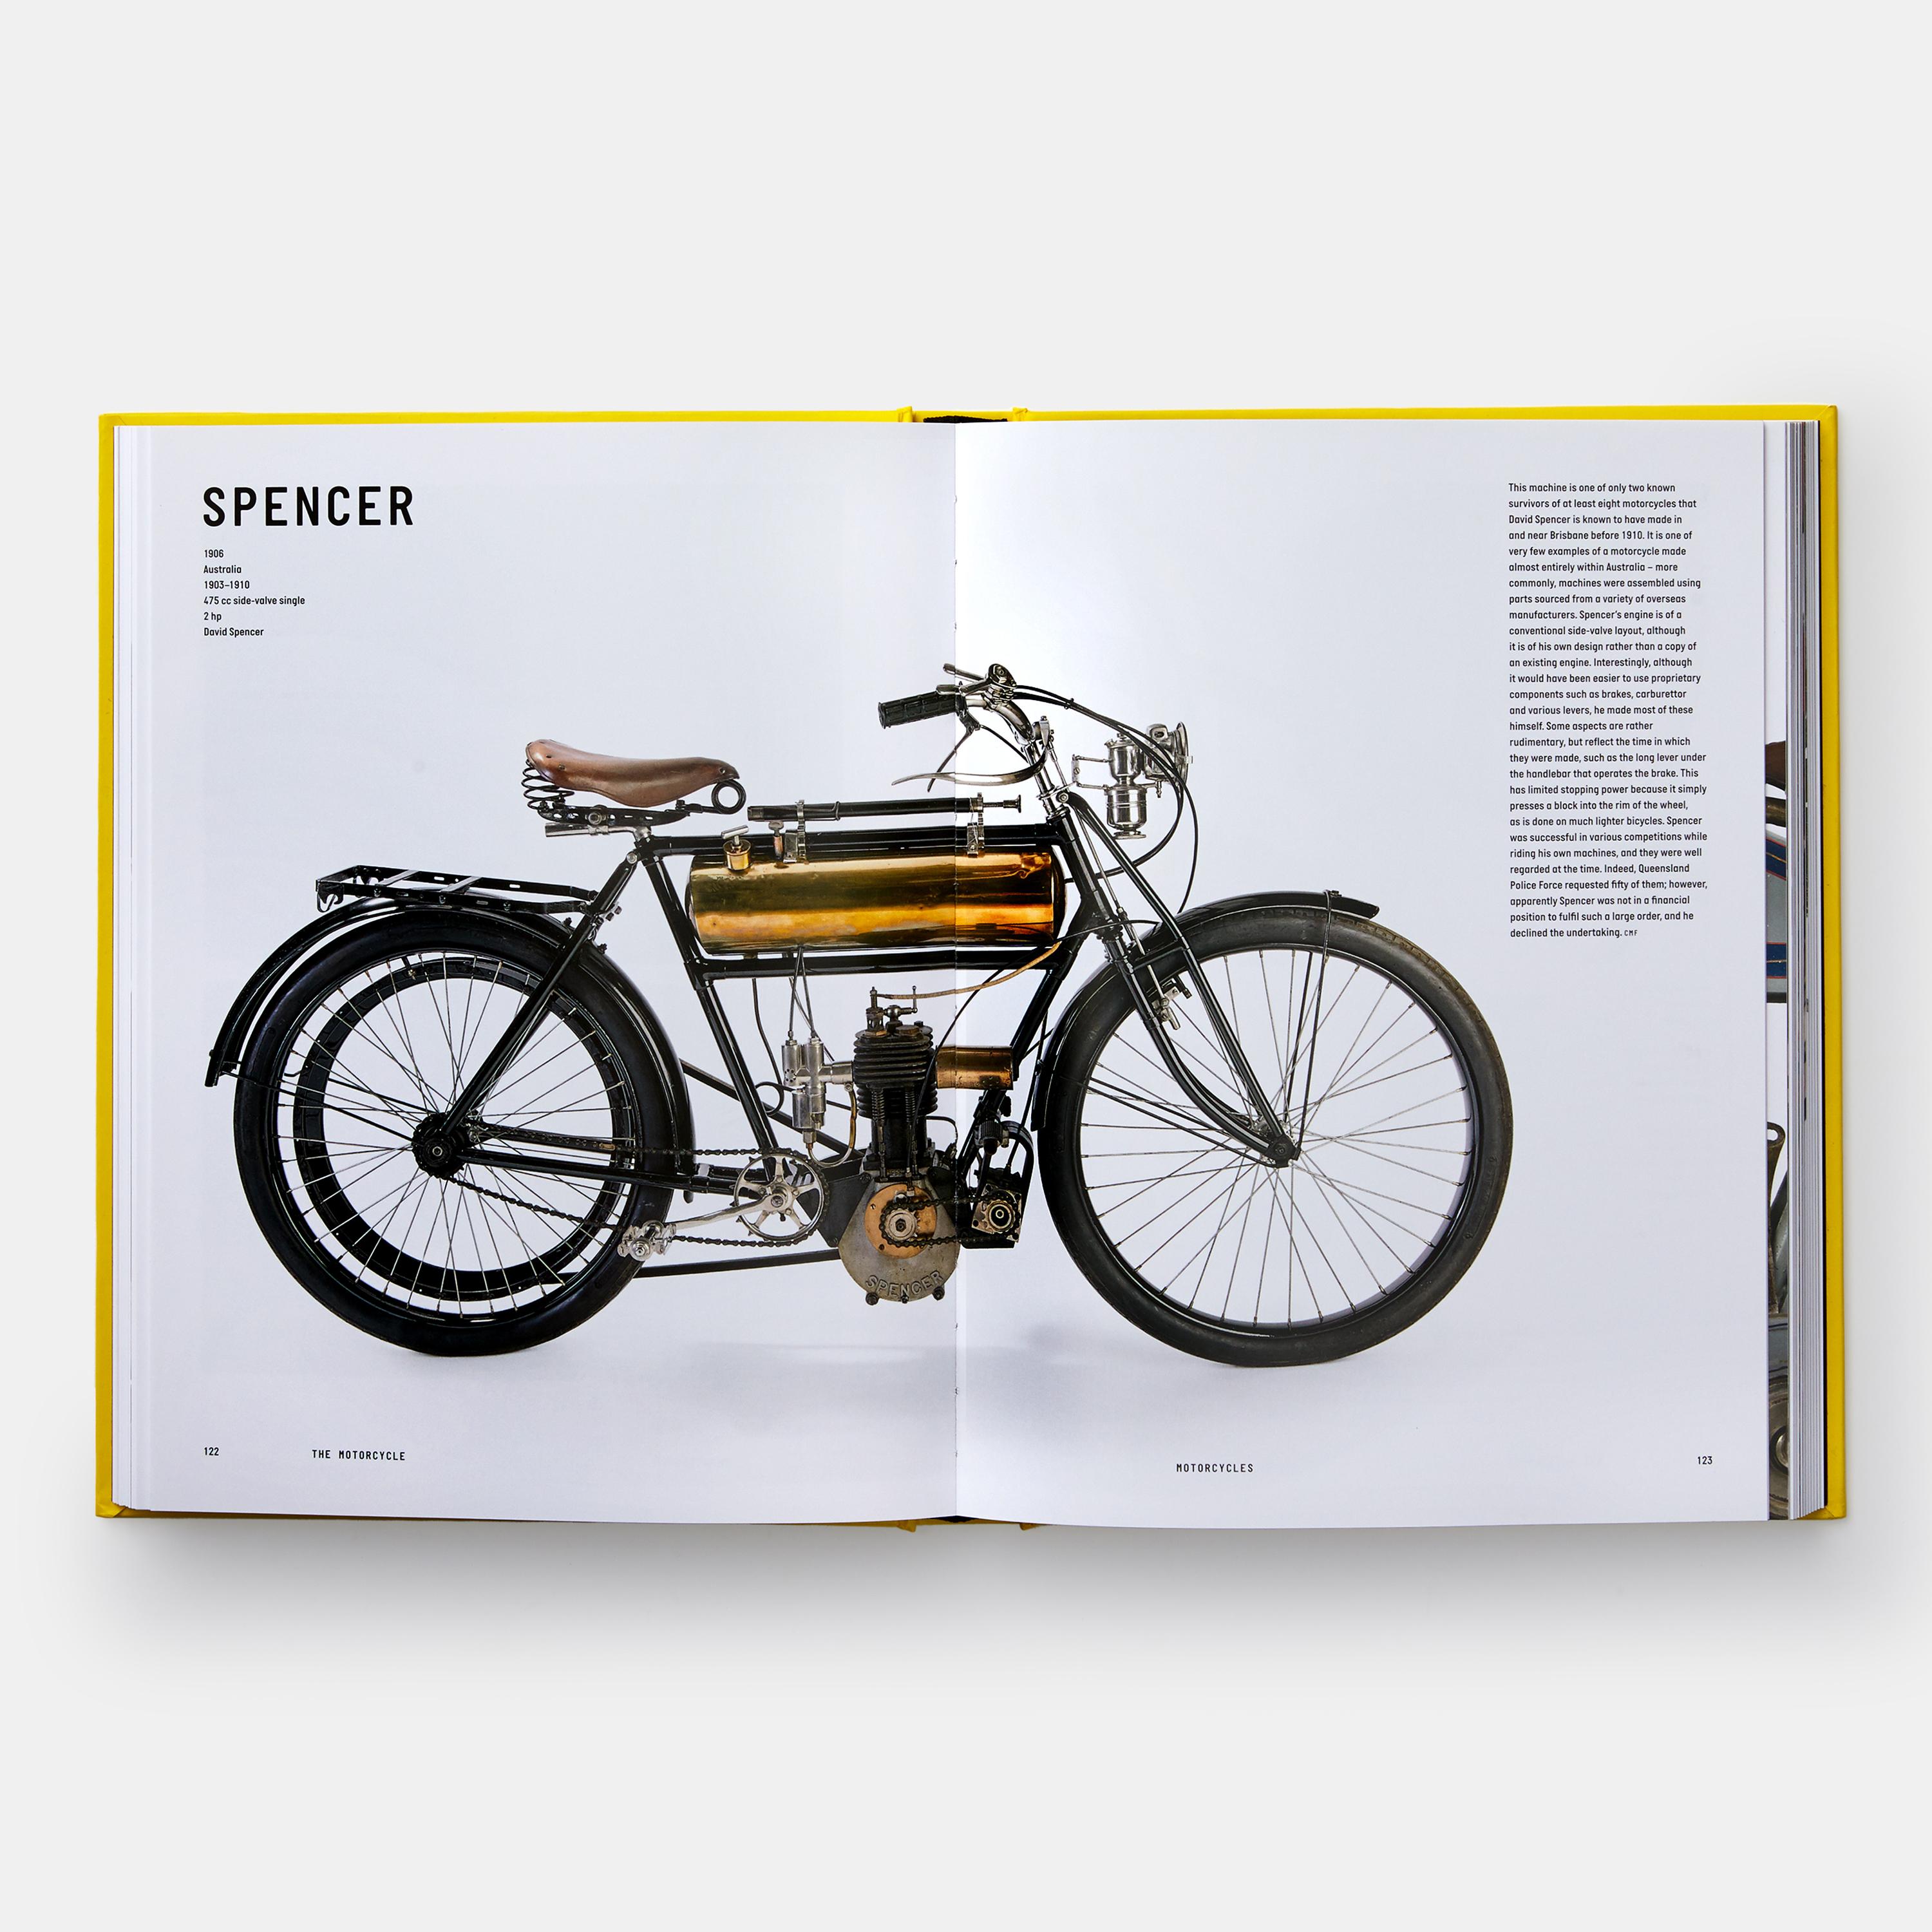 The essential exploration of the design, history, and culture of the motorcycle – an icon of the machine age

Motorcycles are ubiquitous in the world’s streets and cities, evolving over decades in engineering and design to meet individual